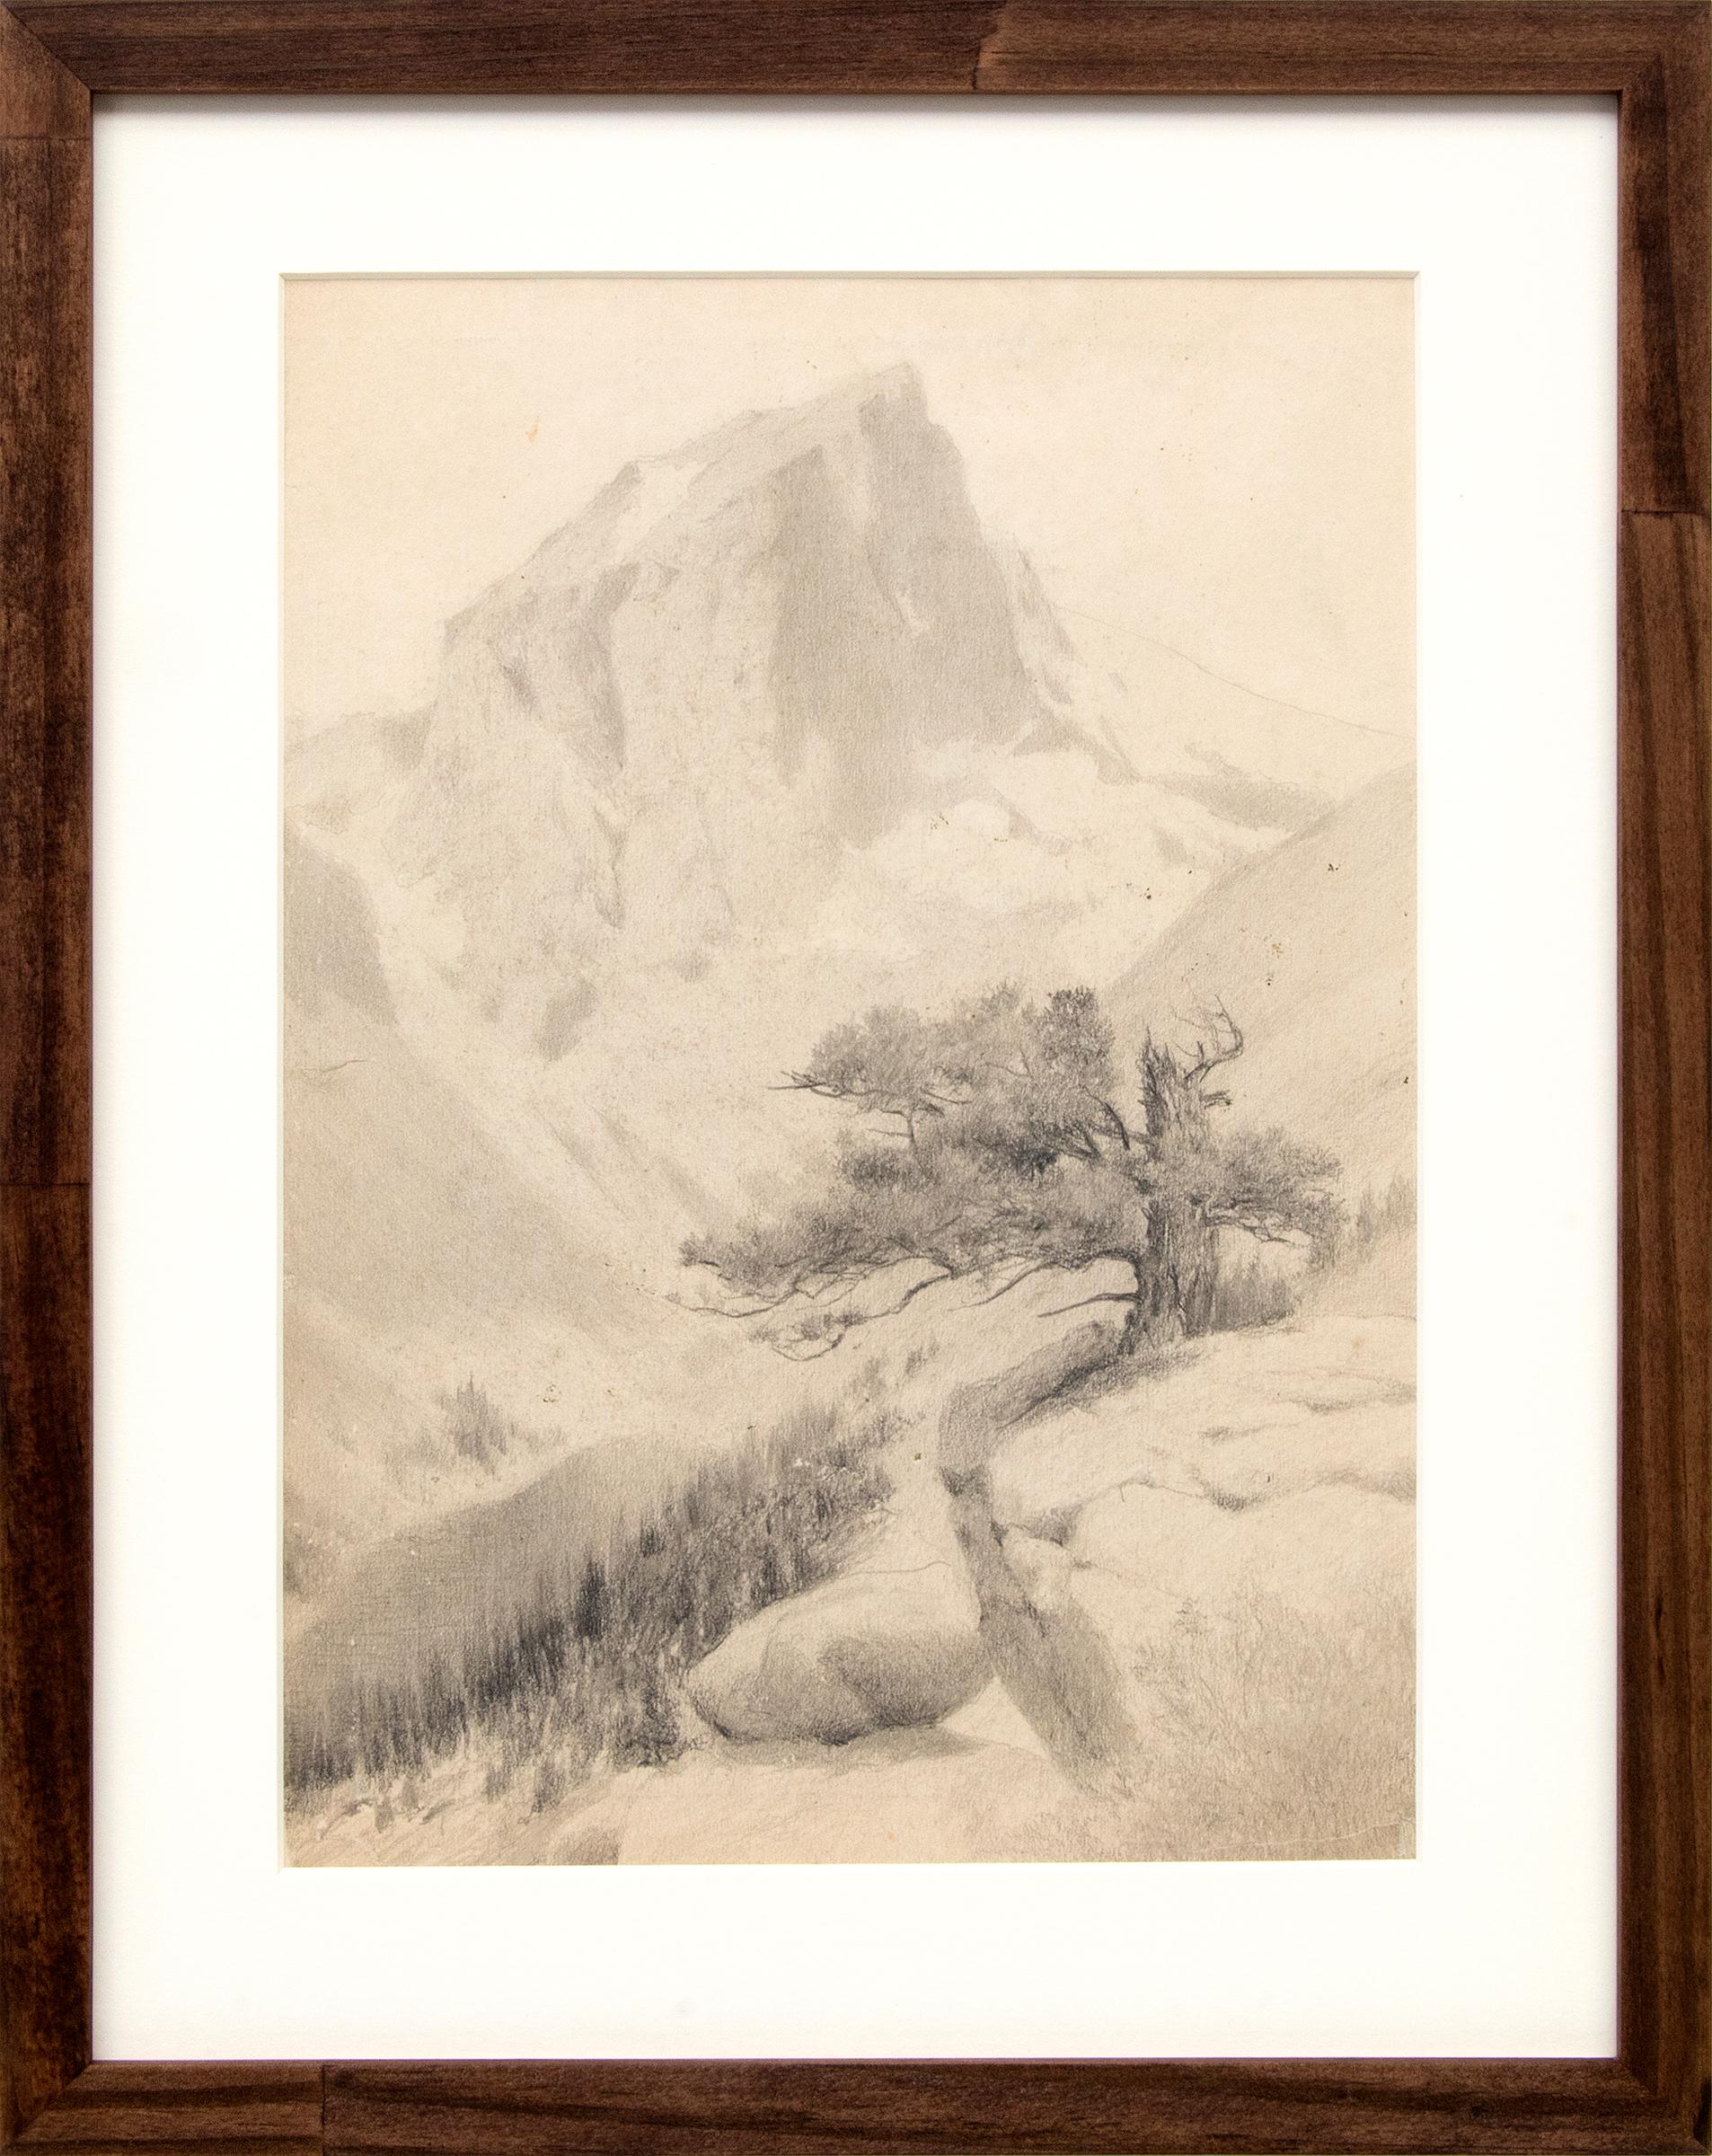 Mountain Peak and Twisted Pine, Early 20th Century Colorado Landscape Drawing - Art by Charles Partridge Adams